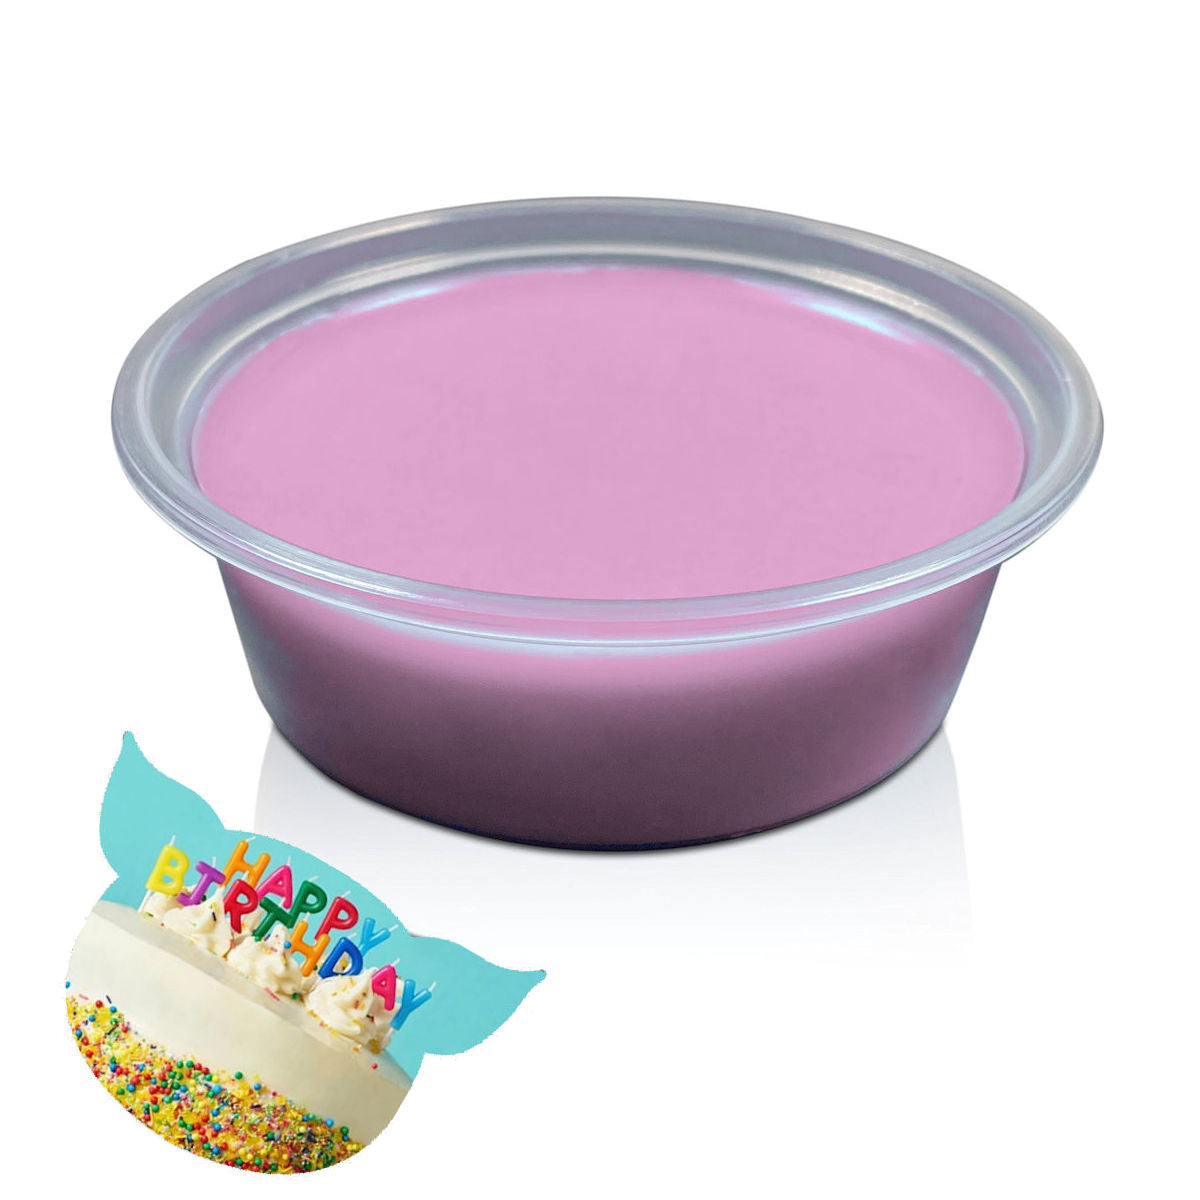 Stinky Pig Highly Scented Soy Wax Melt Pot - 40g Birthday Cake